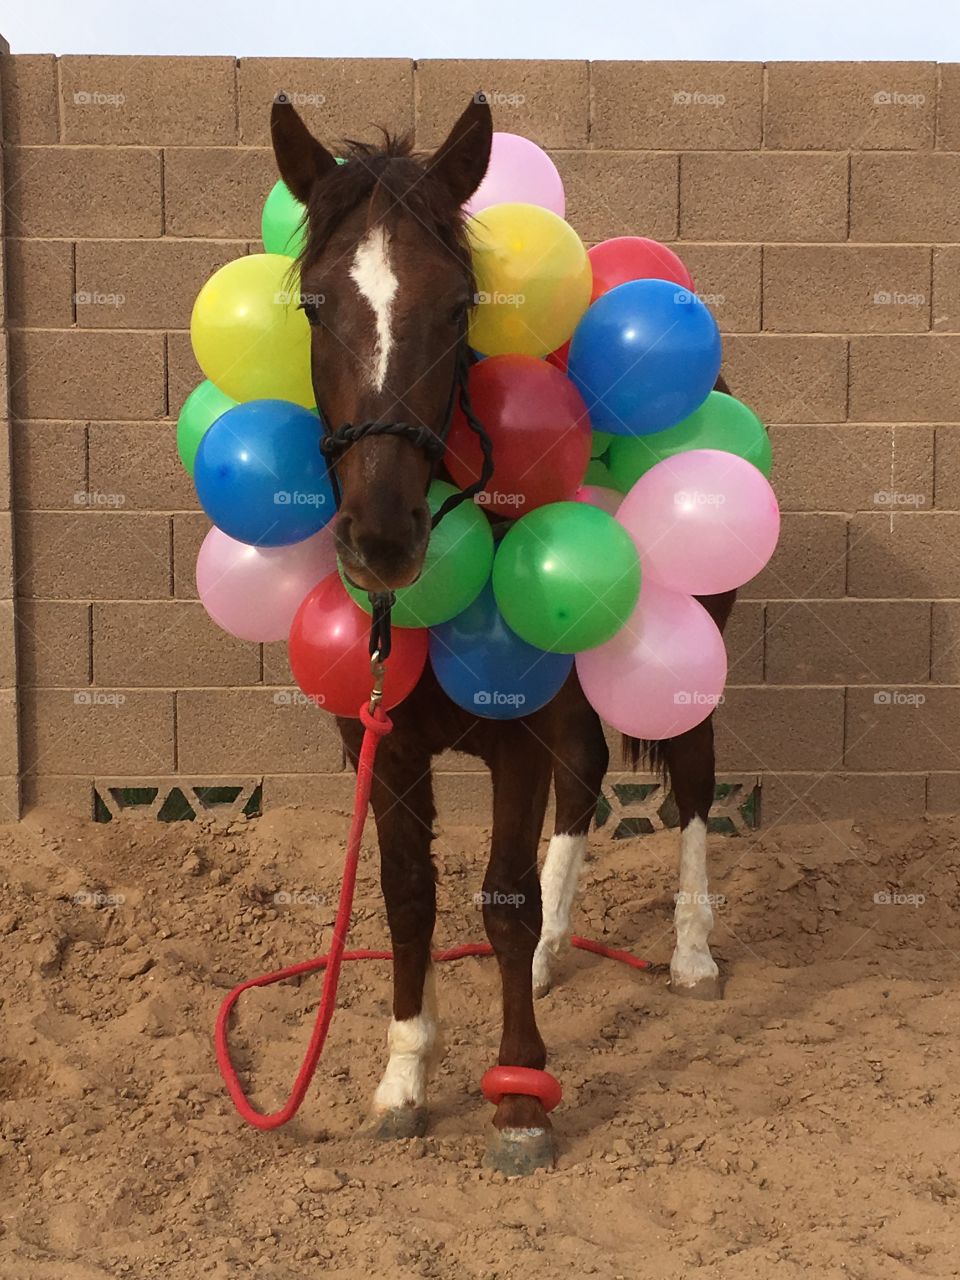 Doc BLM Mustang and Balloons